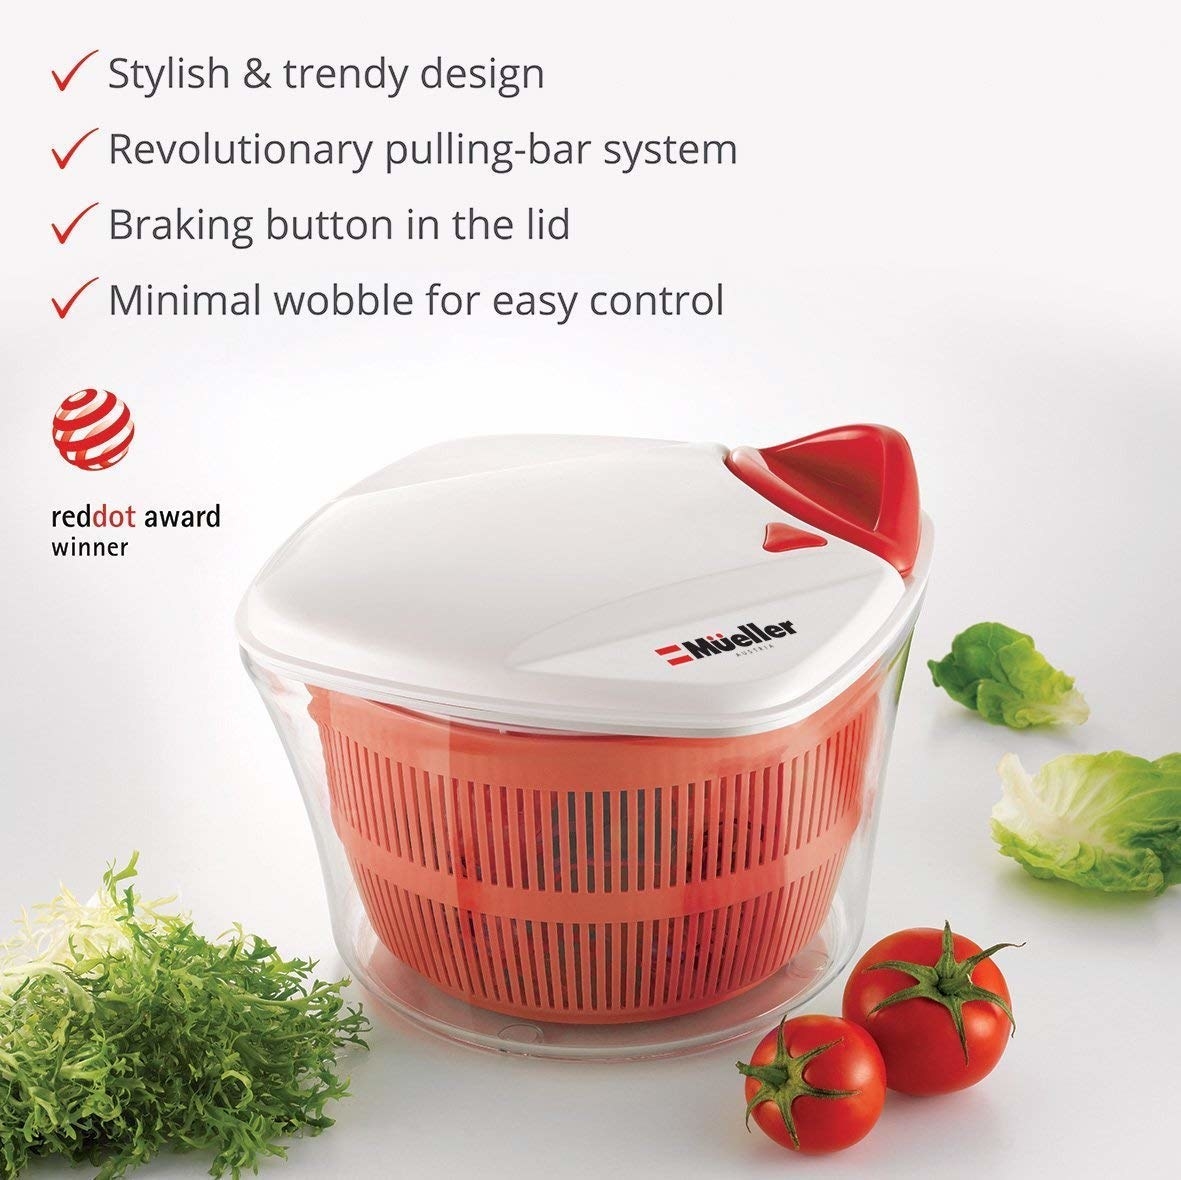 the red and white salad spinner